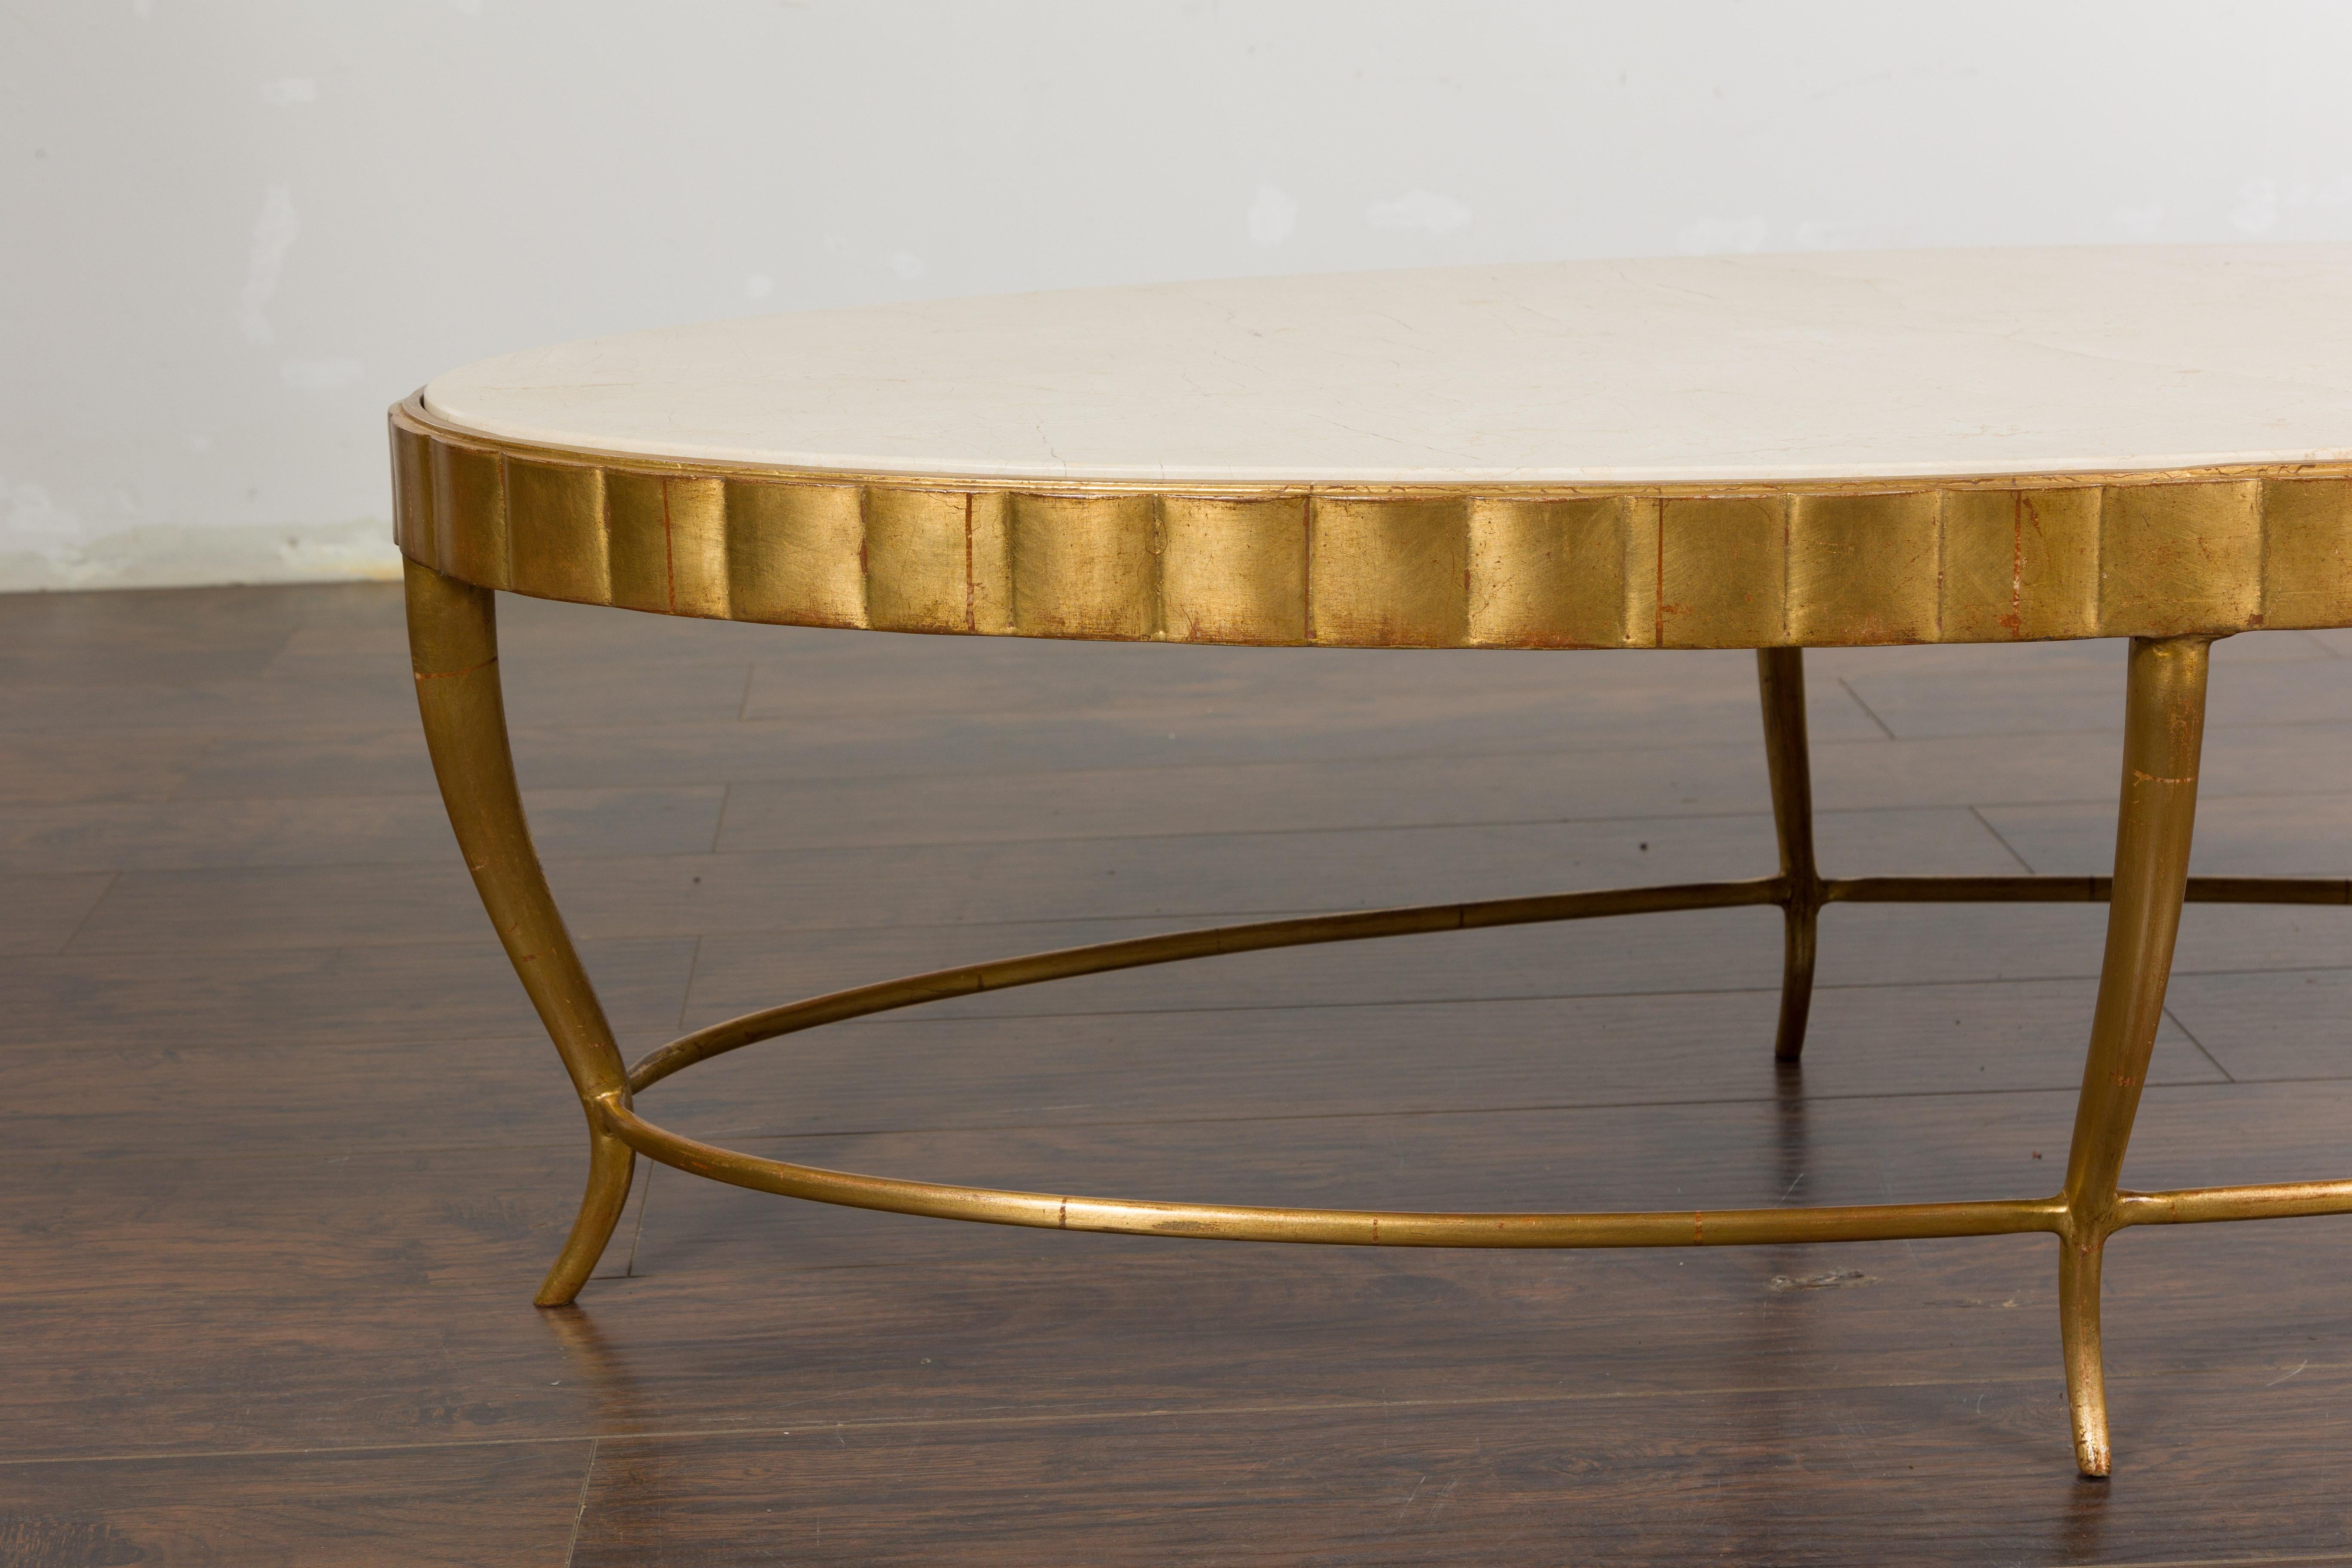 20th Century Italian Midcentury Gilt Metal Coffee Table with Oval Cream Marble Top